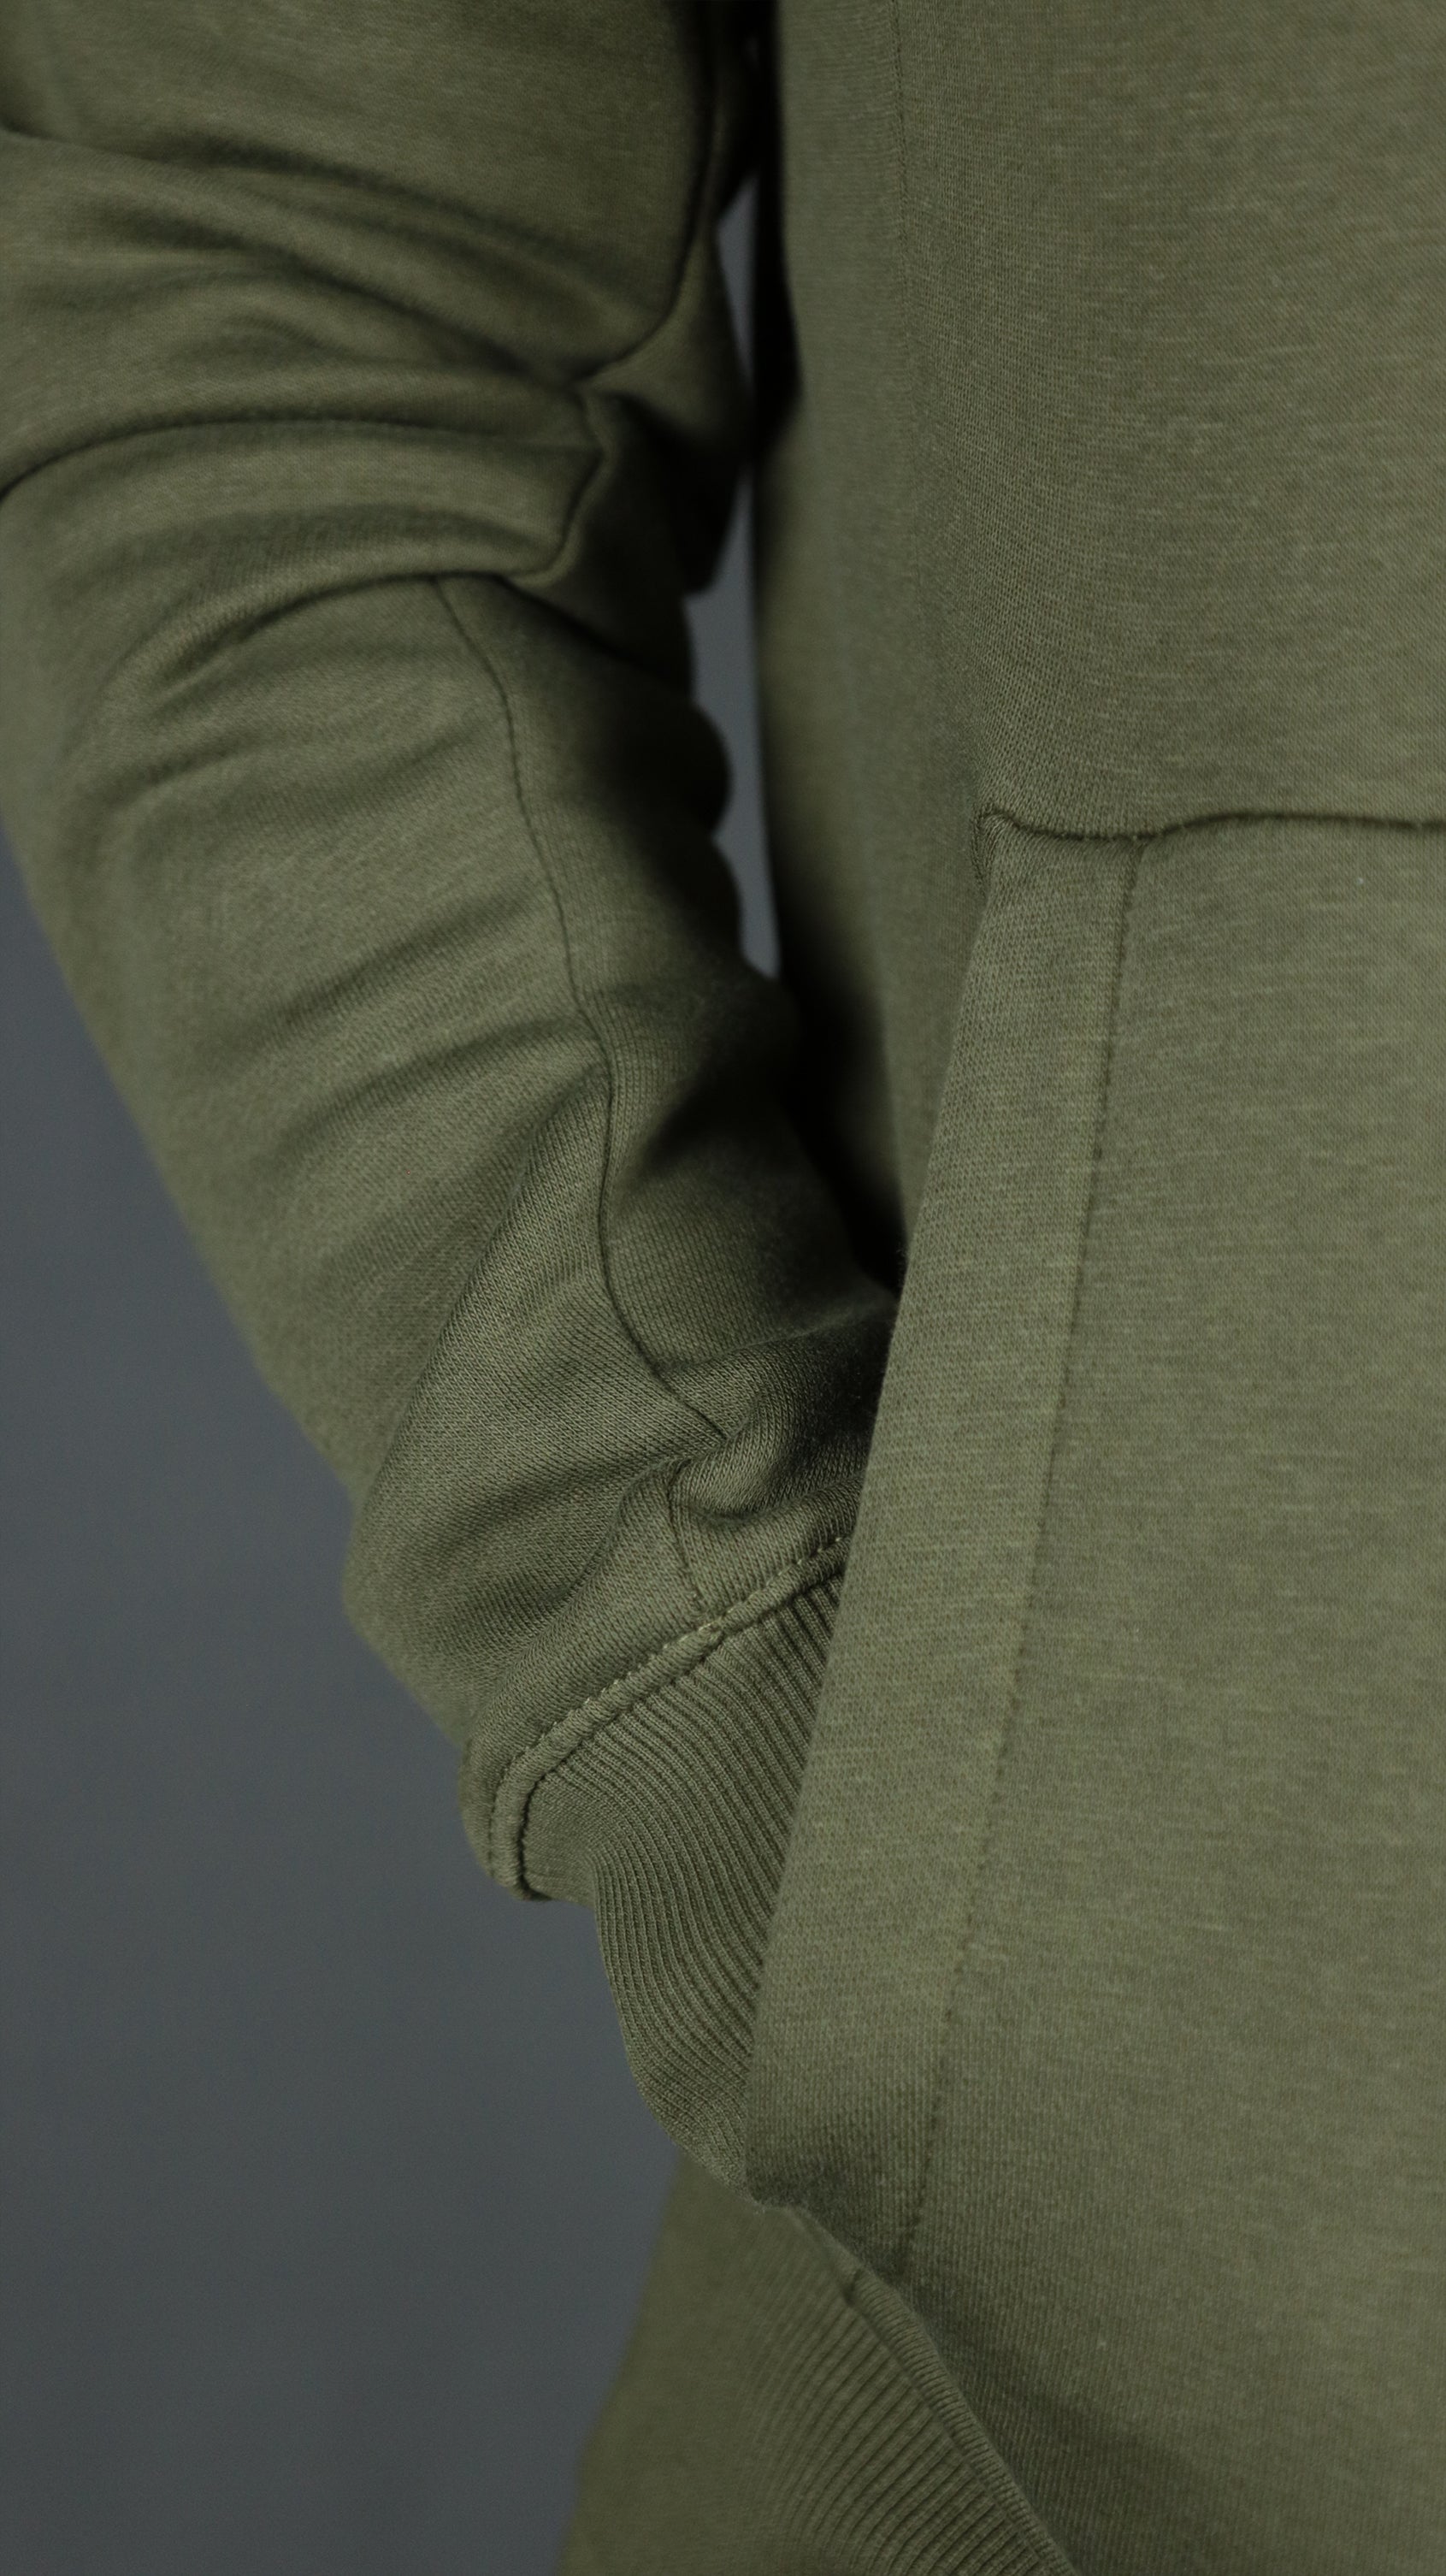 One of the two pockets of the military olive green basic tech fleece hoodie by Jordan Craig.